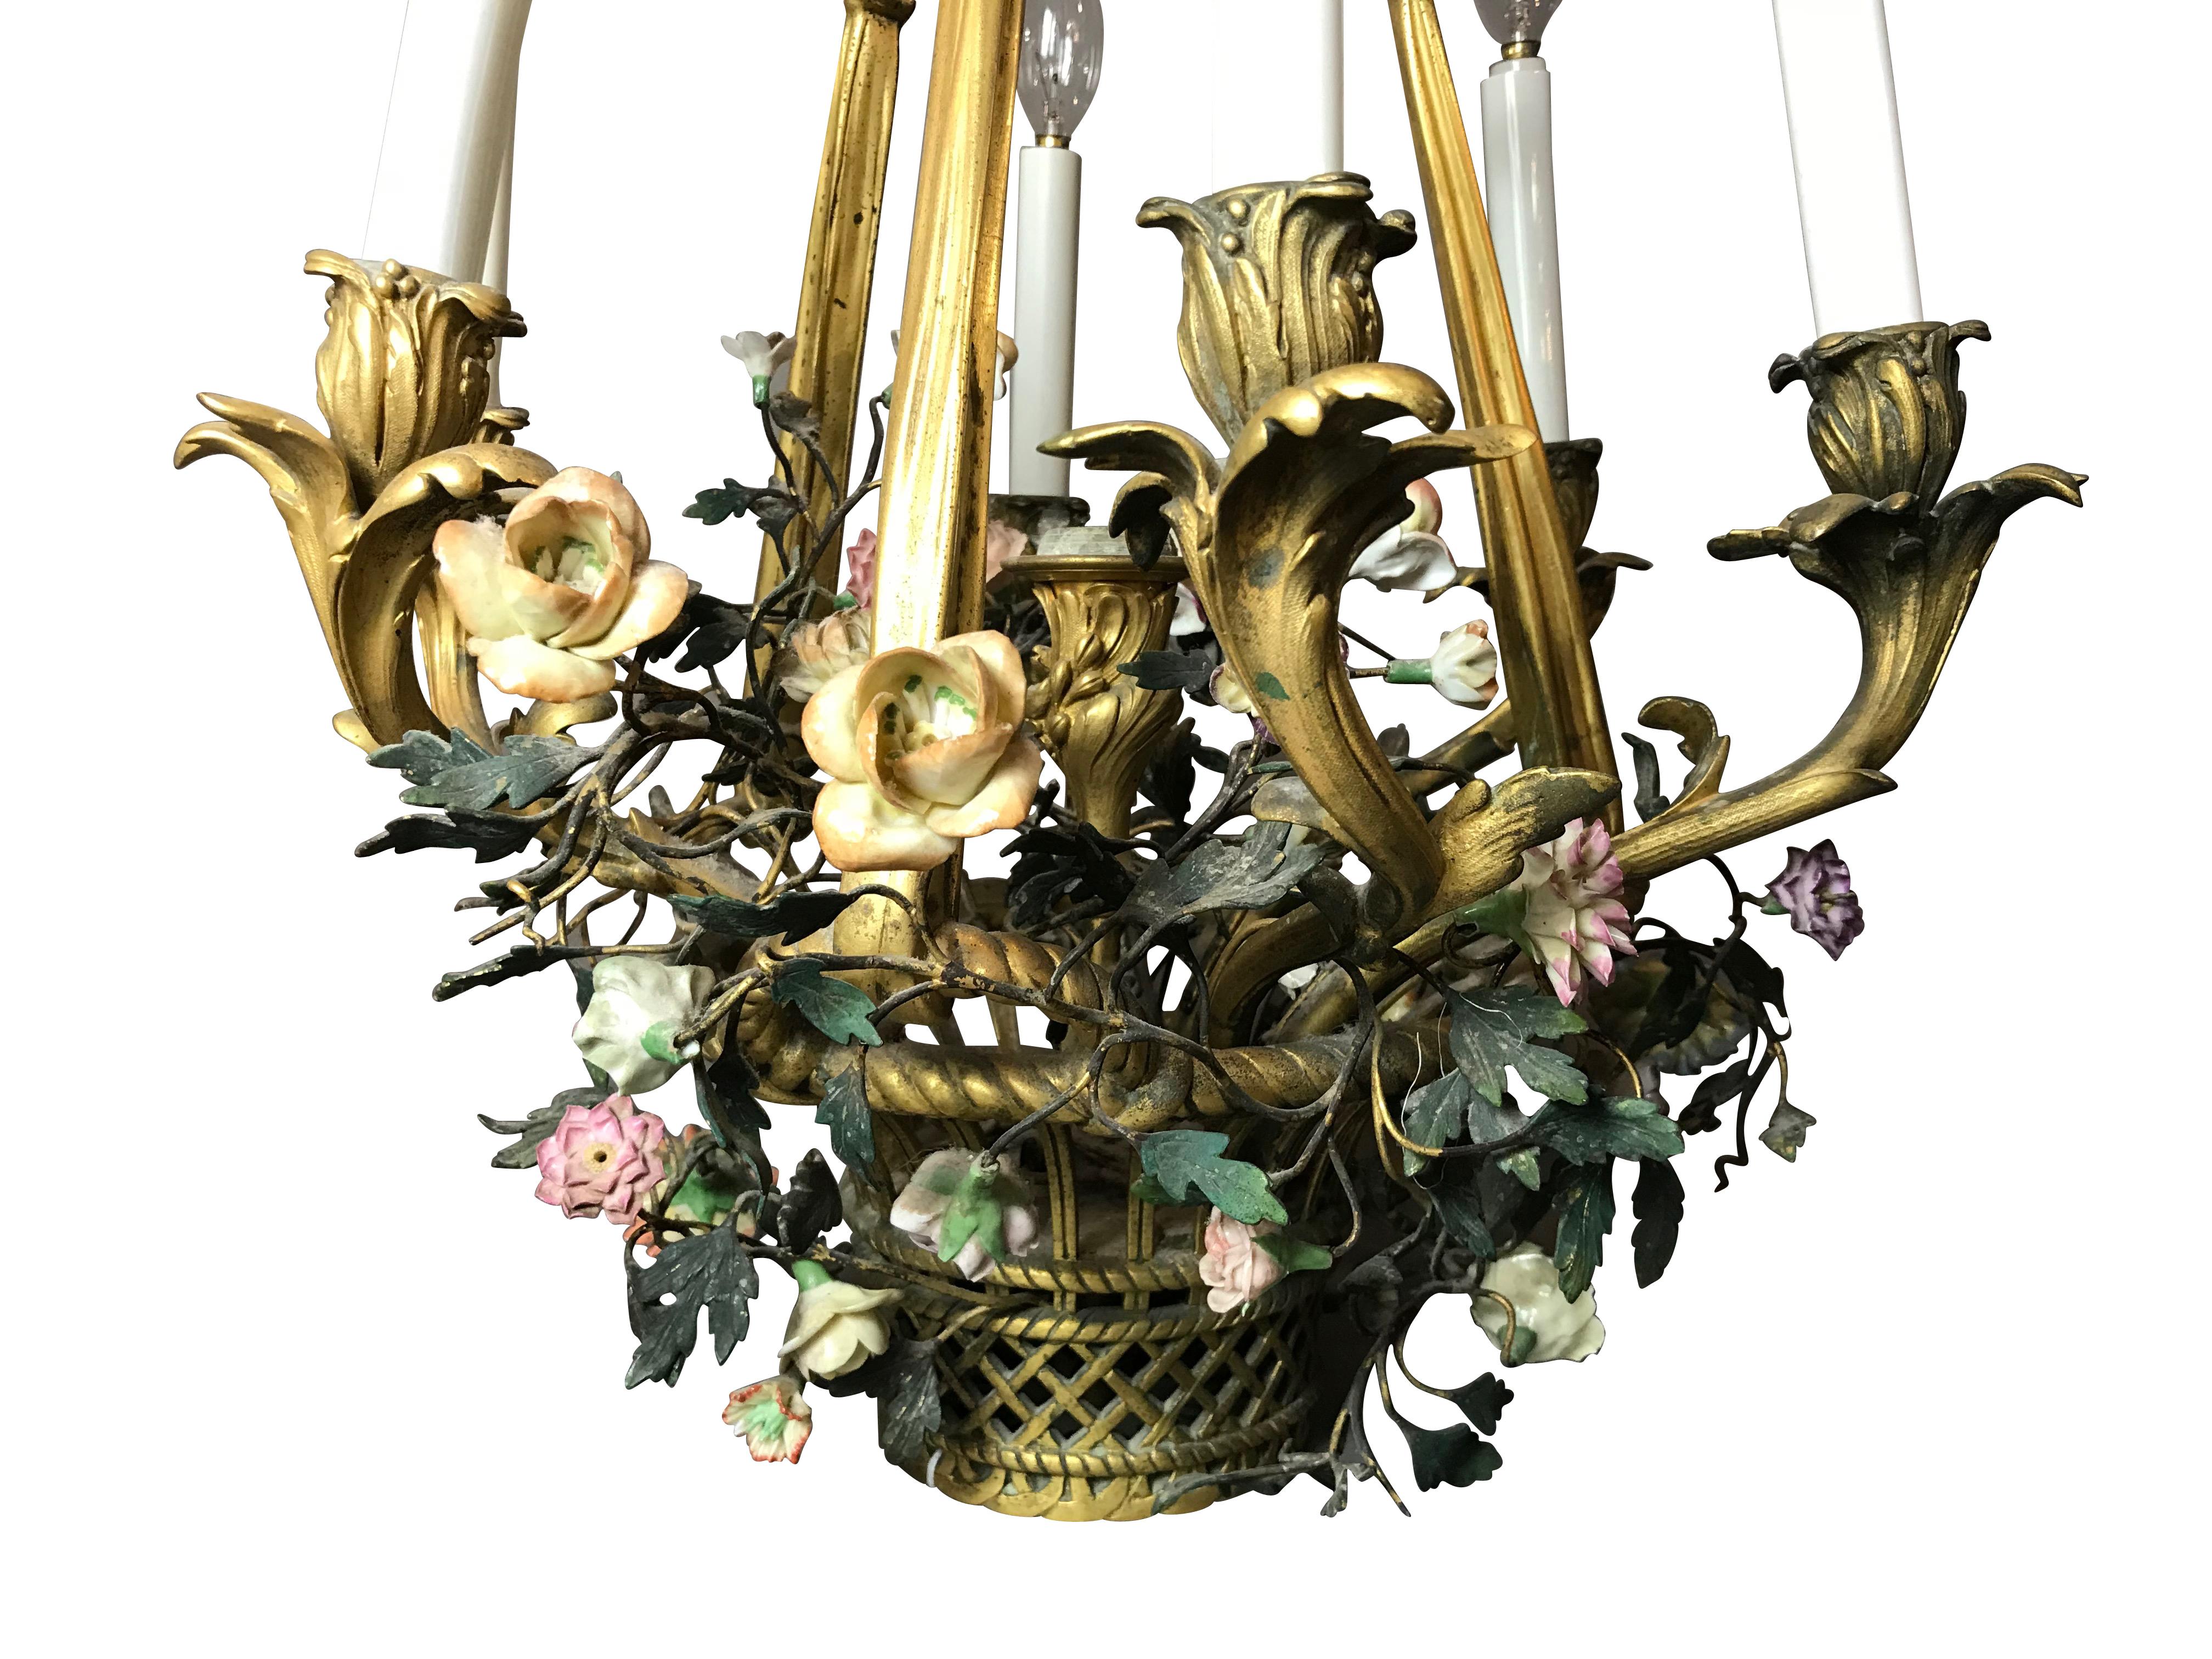 19th century French gilt bronze and enamel flower basket six-light chandelier

Beautifully made woven bronze basket with several enameled bronze flowers sticking out of the basket as if it were a flower pot. The gilt in very good condition and